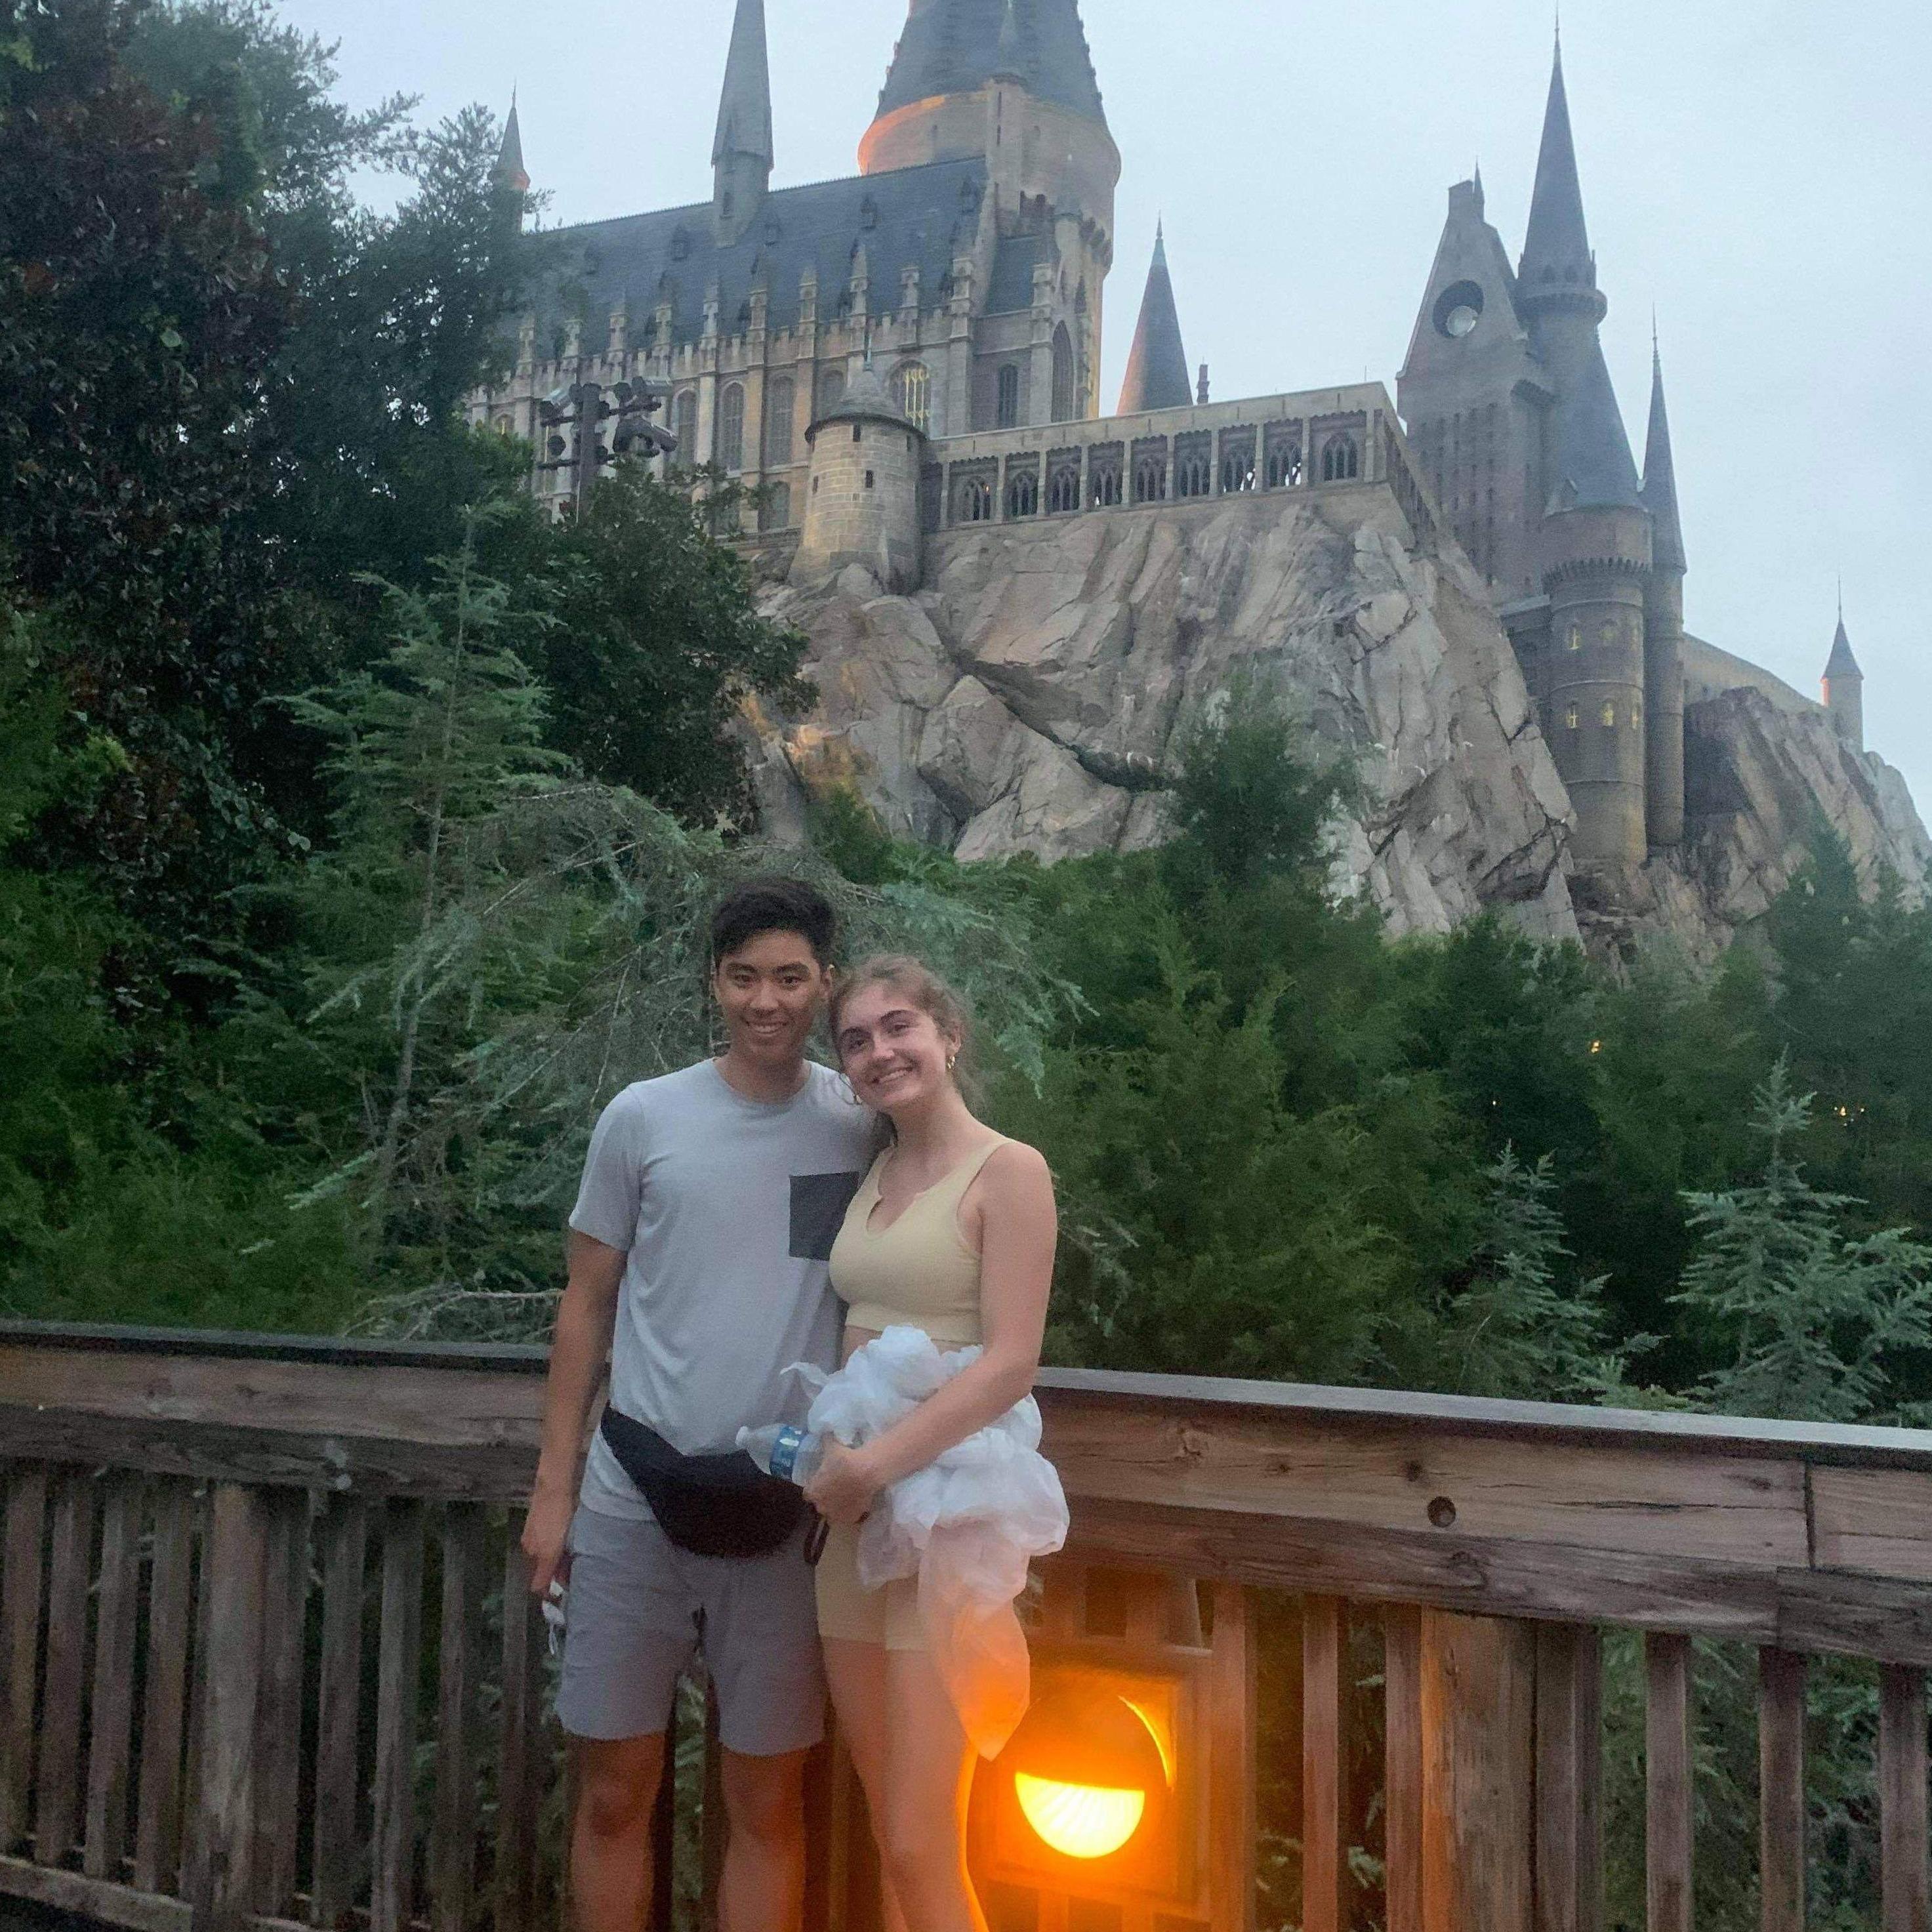 Our first trip to a theme park together